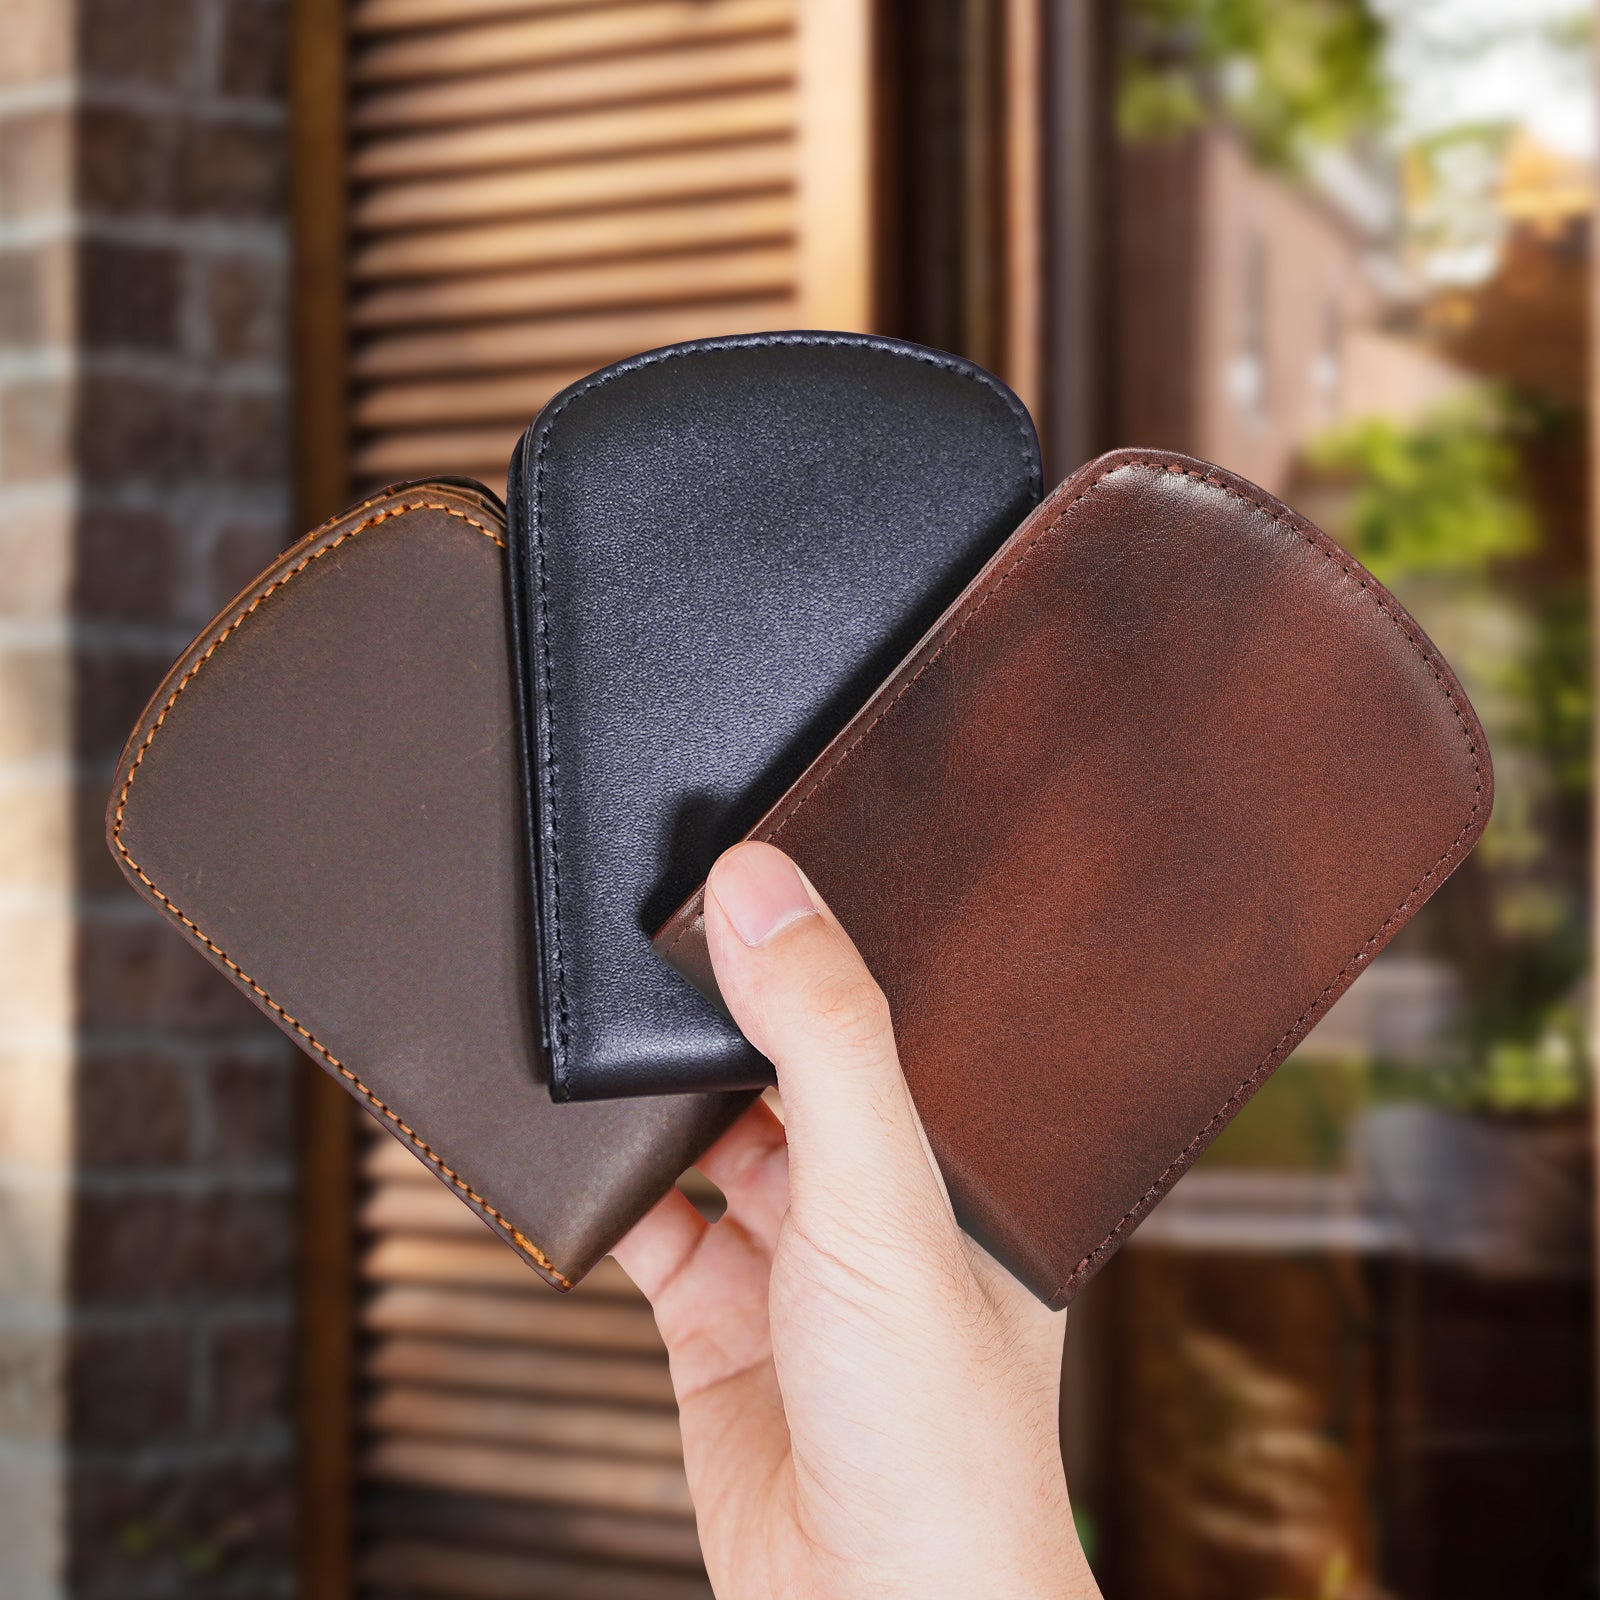 The Bifold Wallet with ID Window